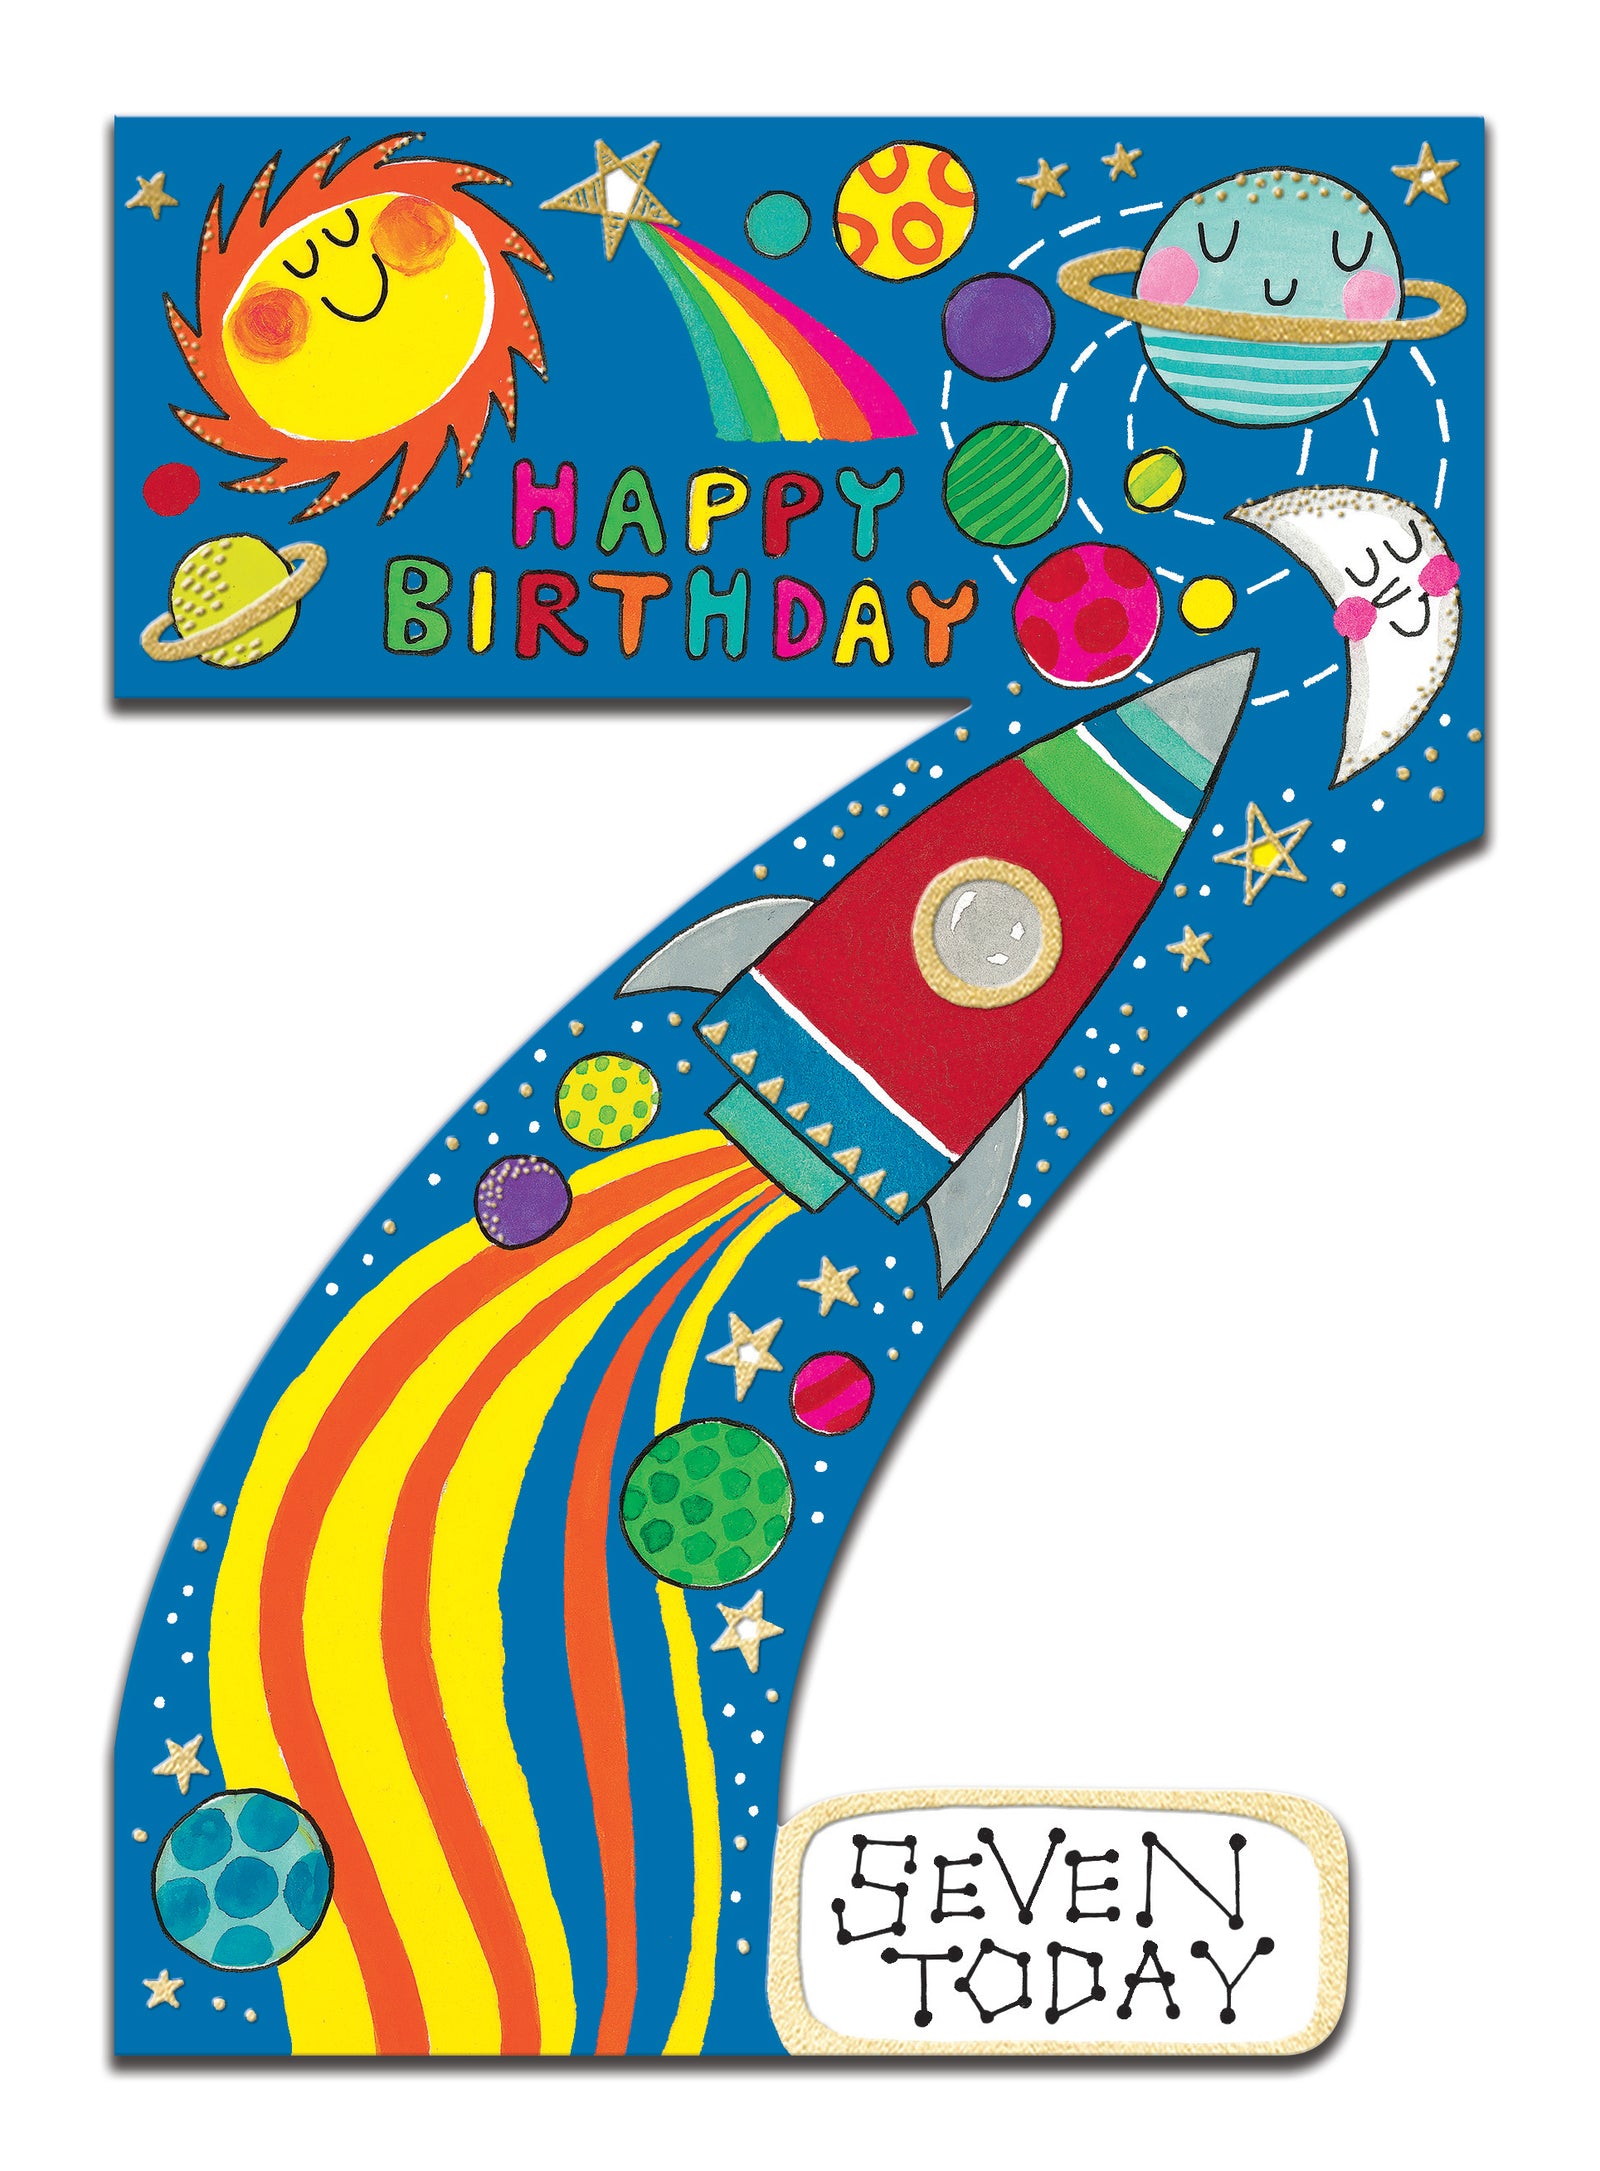 Age Doesn't Matter Friends Do Birthday Card - Penny Black